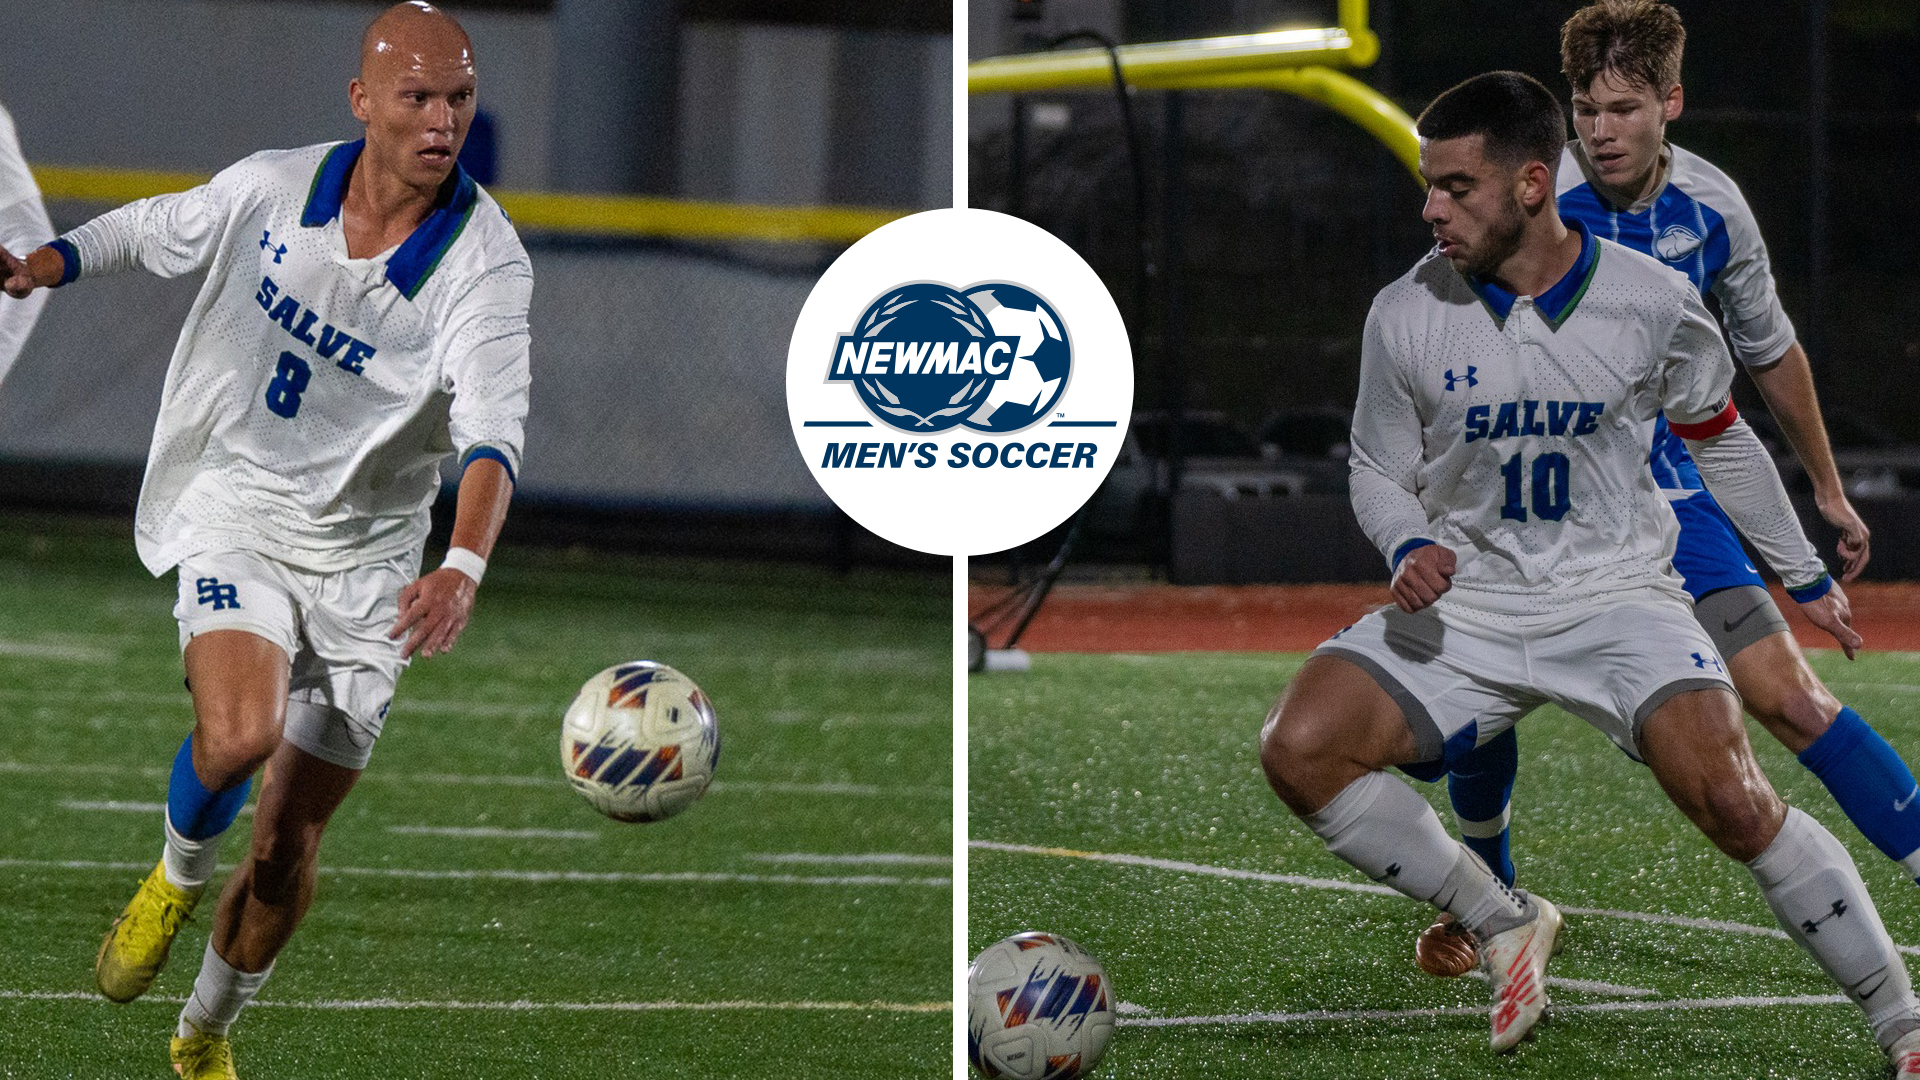 Ben Tomas and Jordan Borges earned selections to the NEWMAC All-Conference Men's Soccer Team.